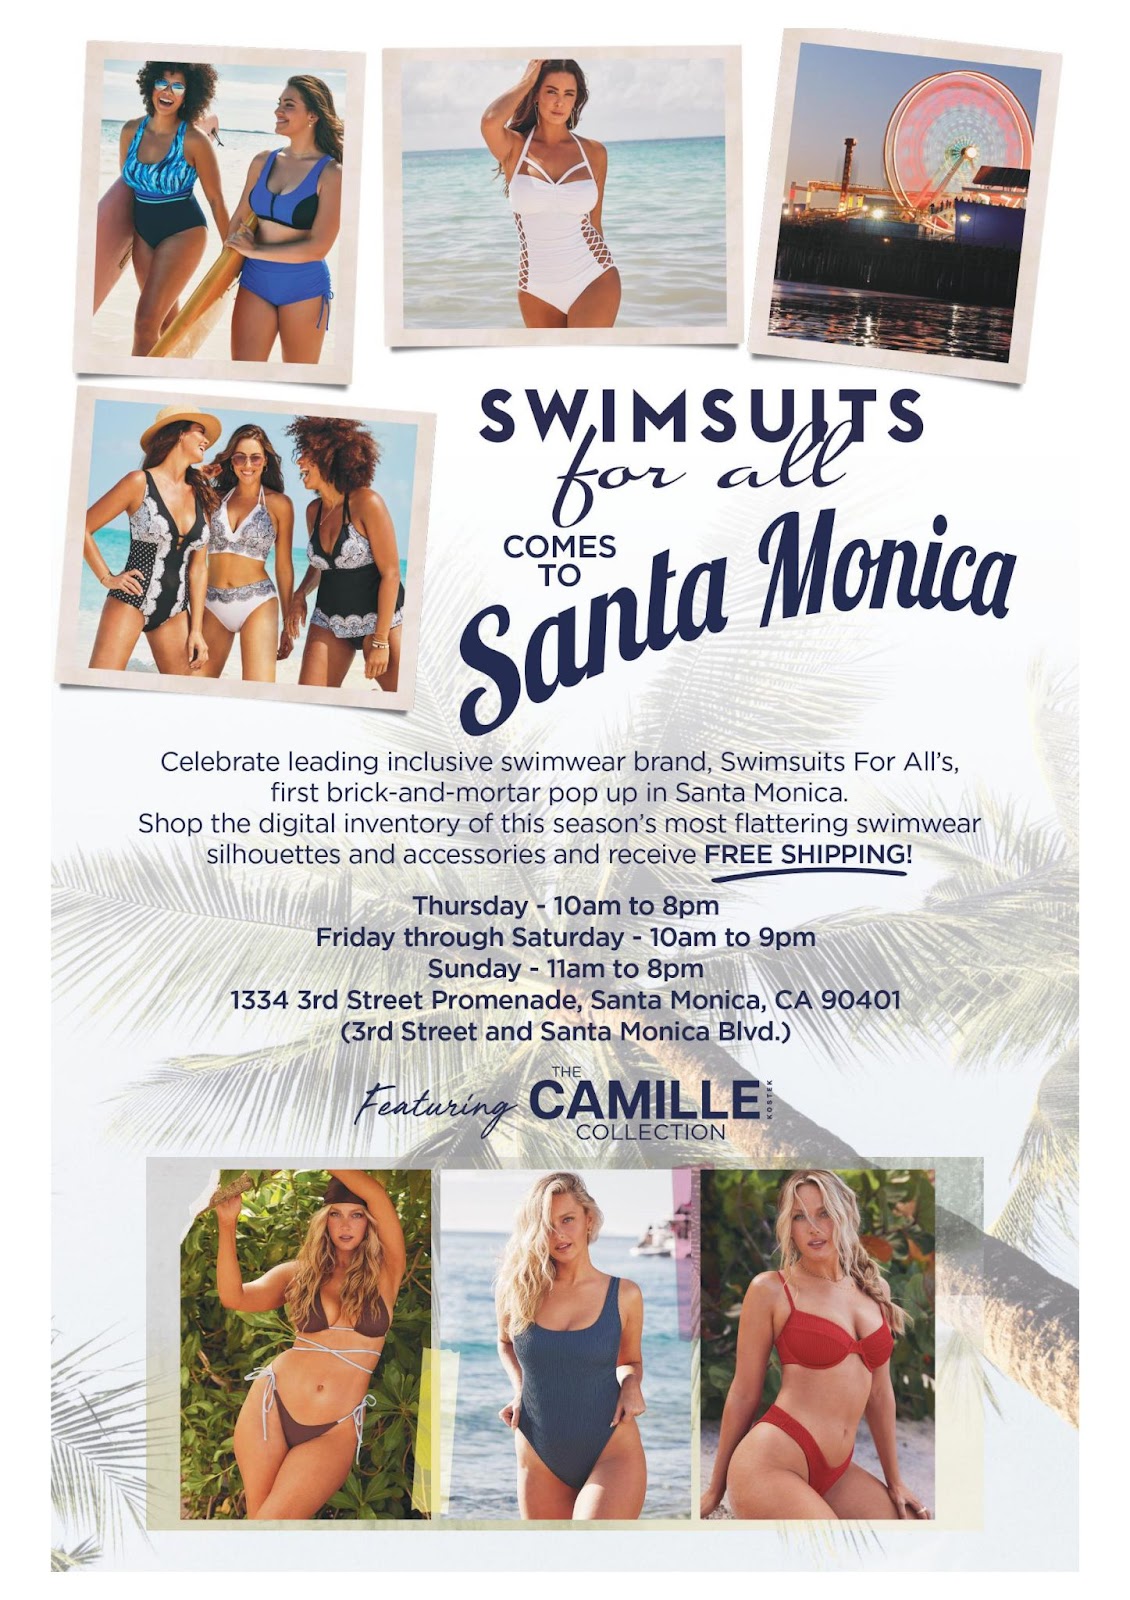 Swimsuits For All: Pop Up With Camille Kostek